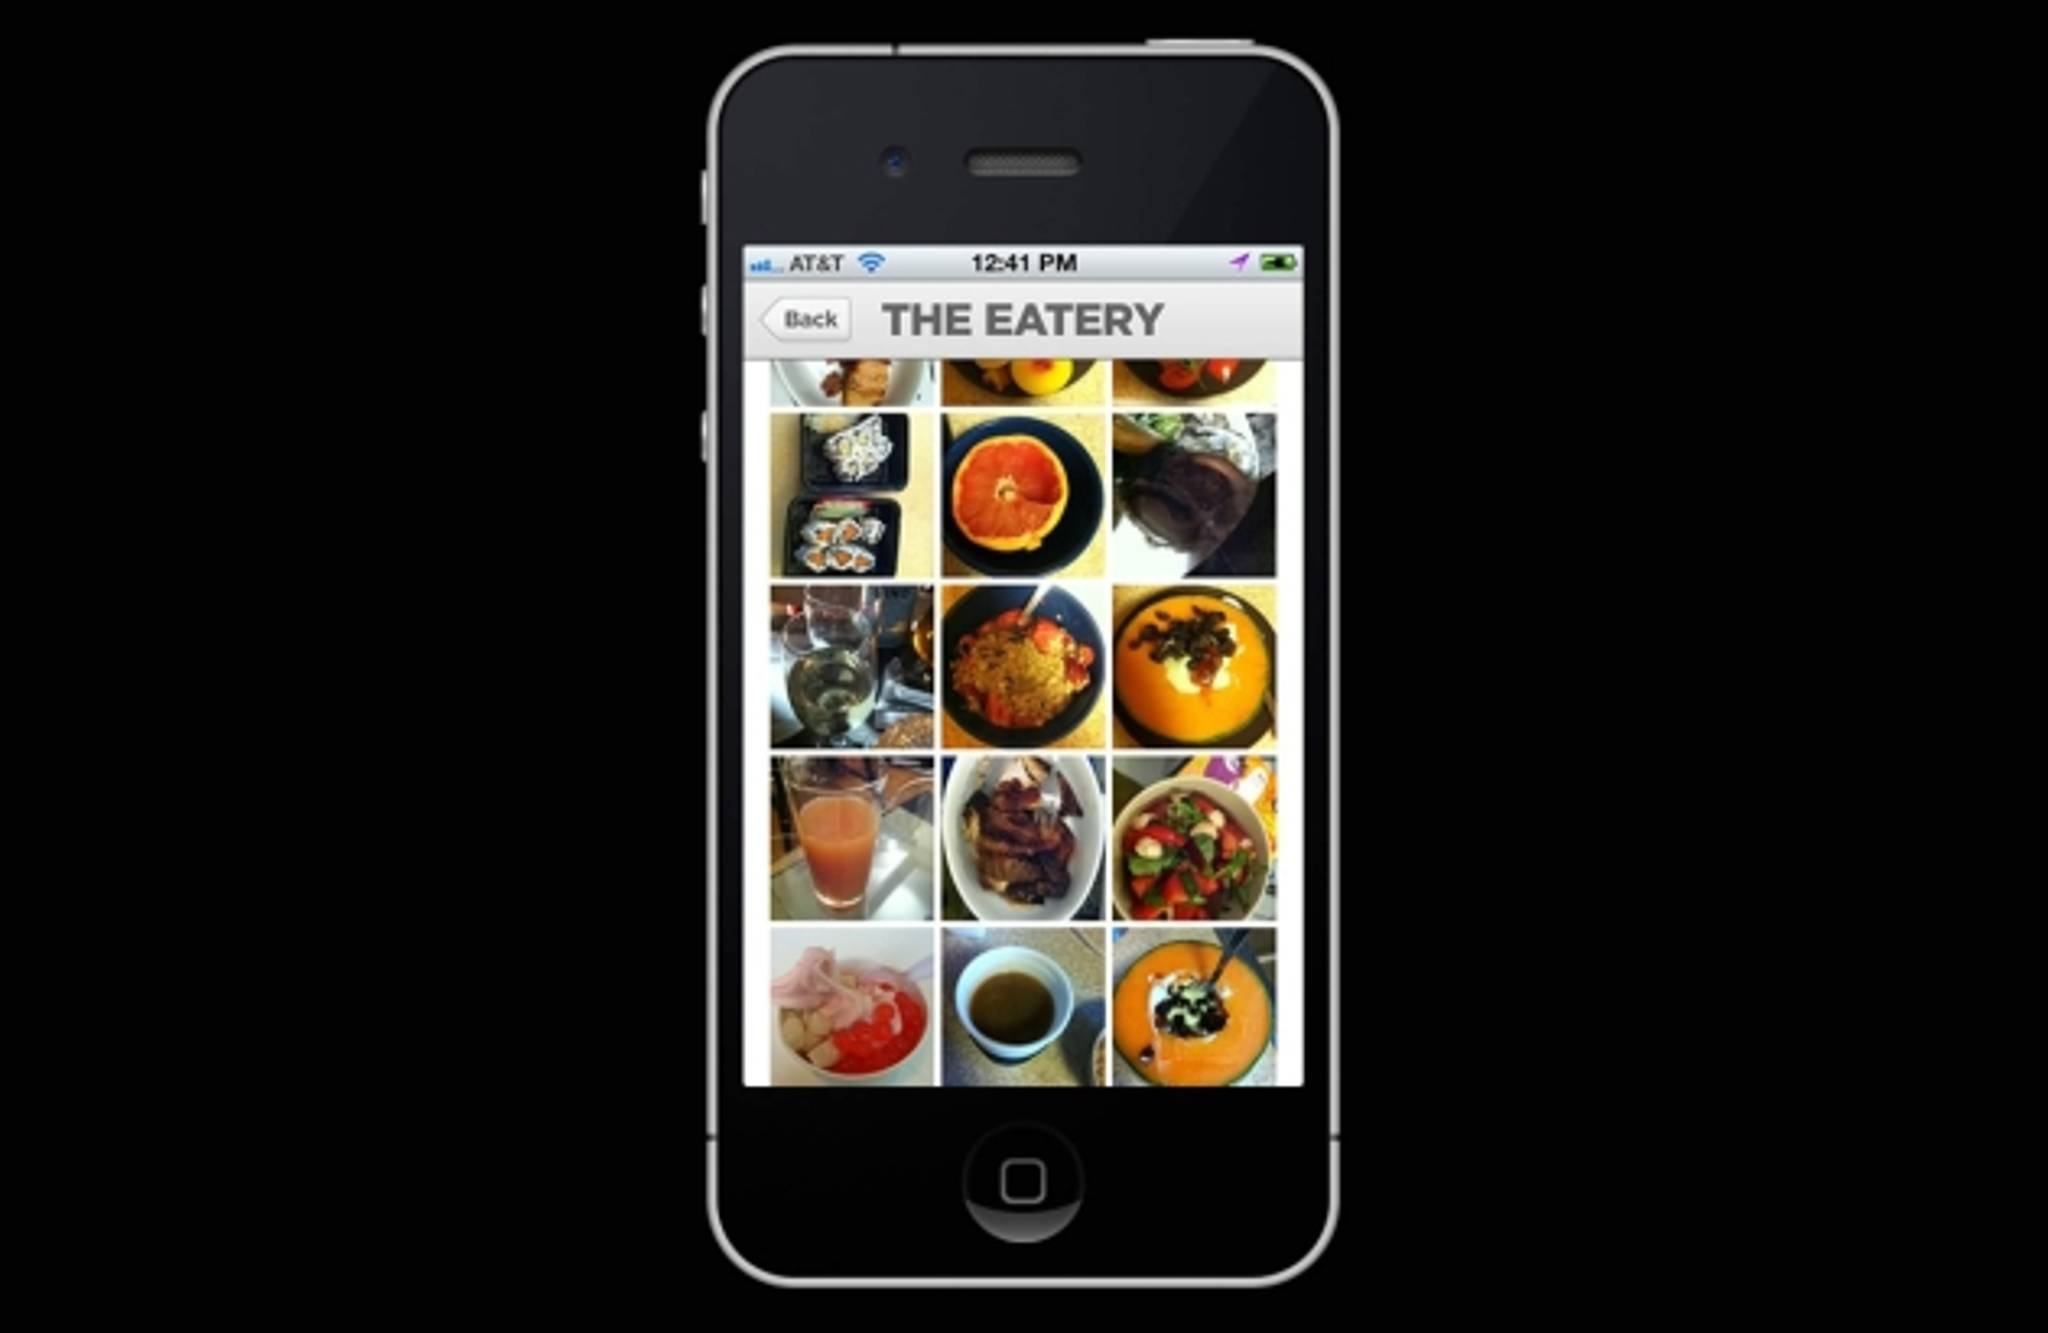 The Eatery: entering the era of 'interactive health'